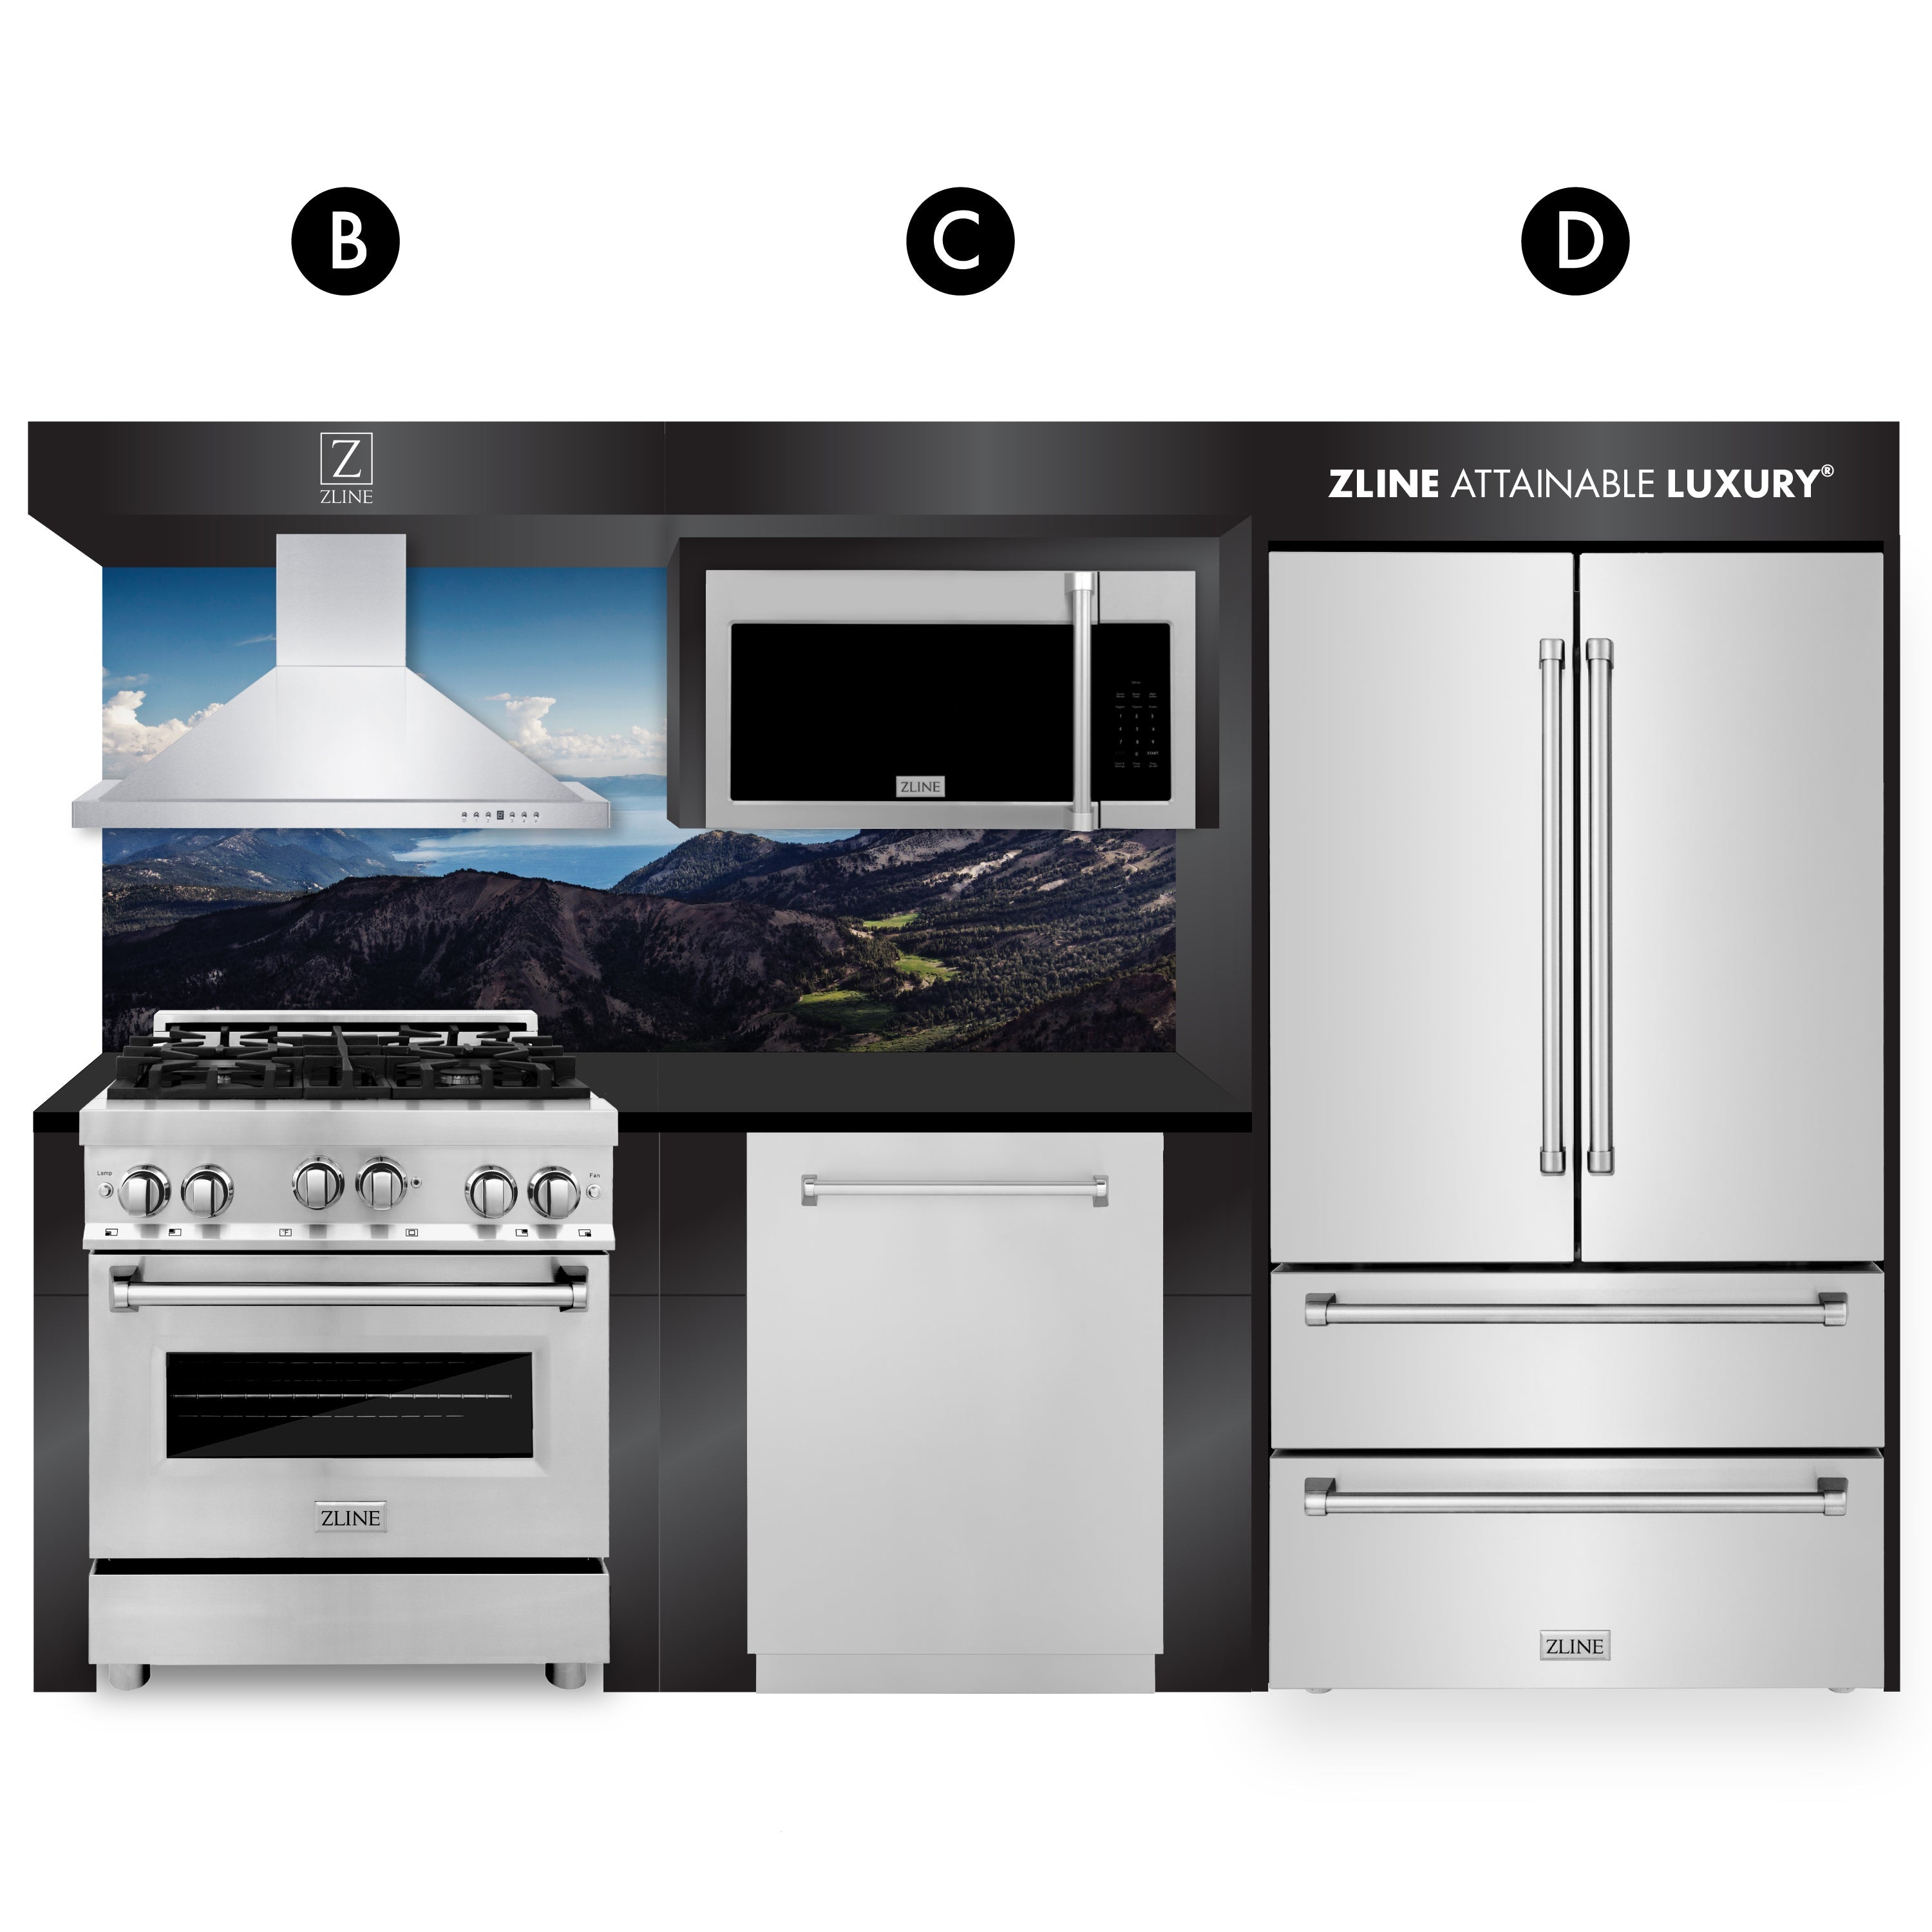 ZLINE Kitchen Vignette with a Stainless Steel Refrigerator, Dual Fuel Freestanding Range, Stainless Steel Range Hood, 30" Over the Range Microwave, and Monument Style Dishwasher (VND-BCD-RA)